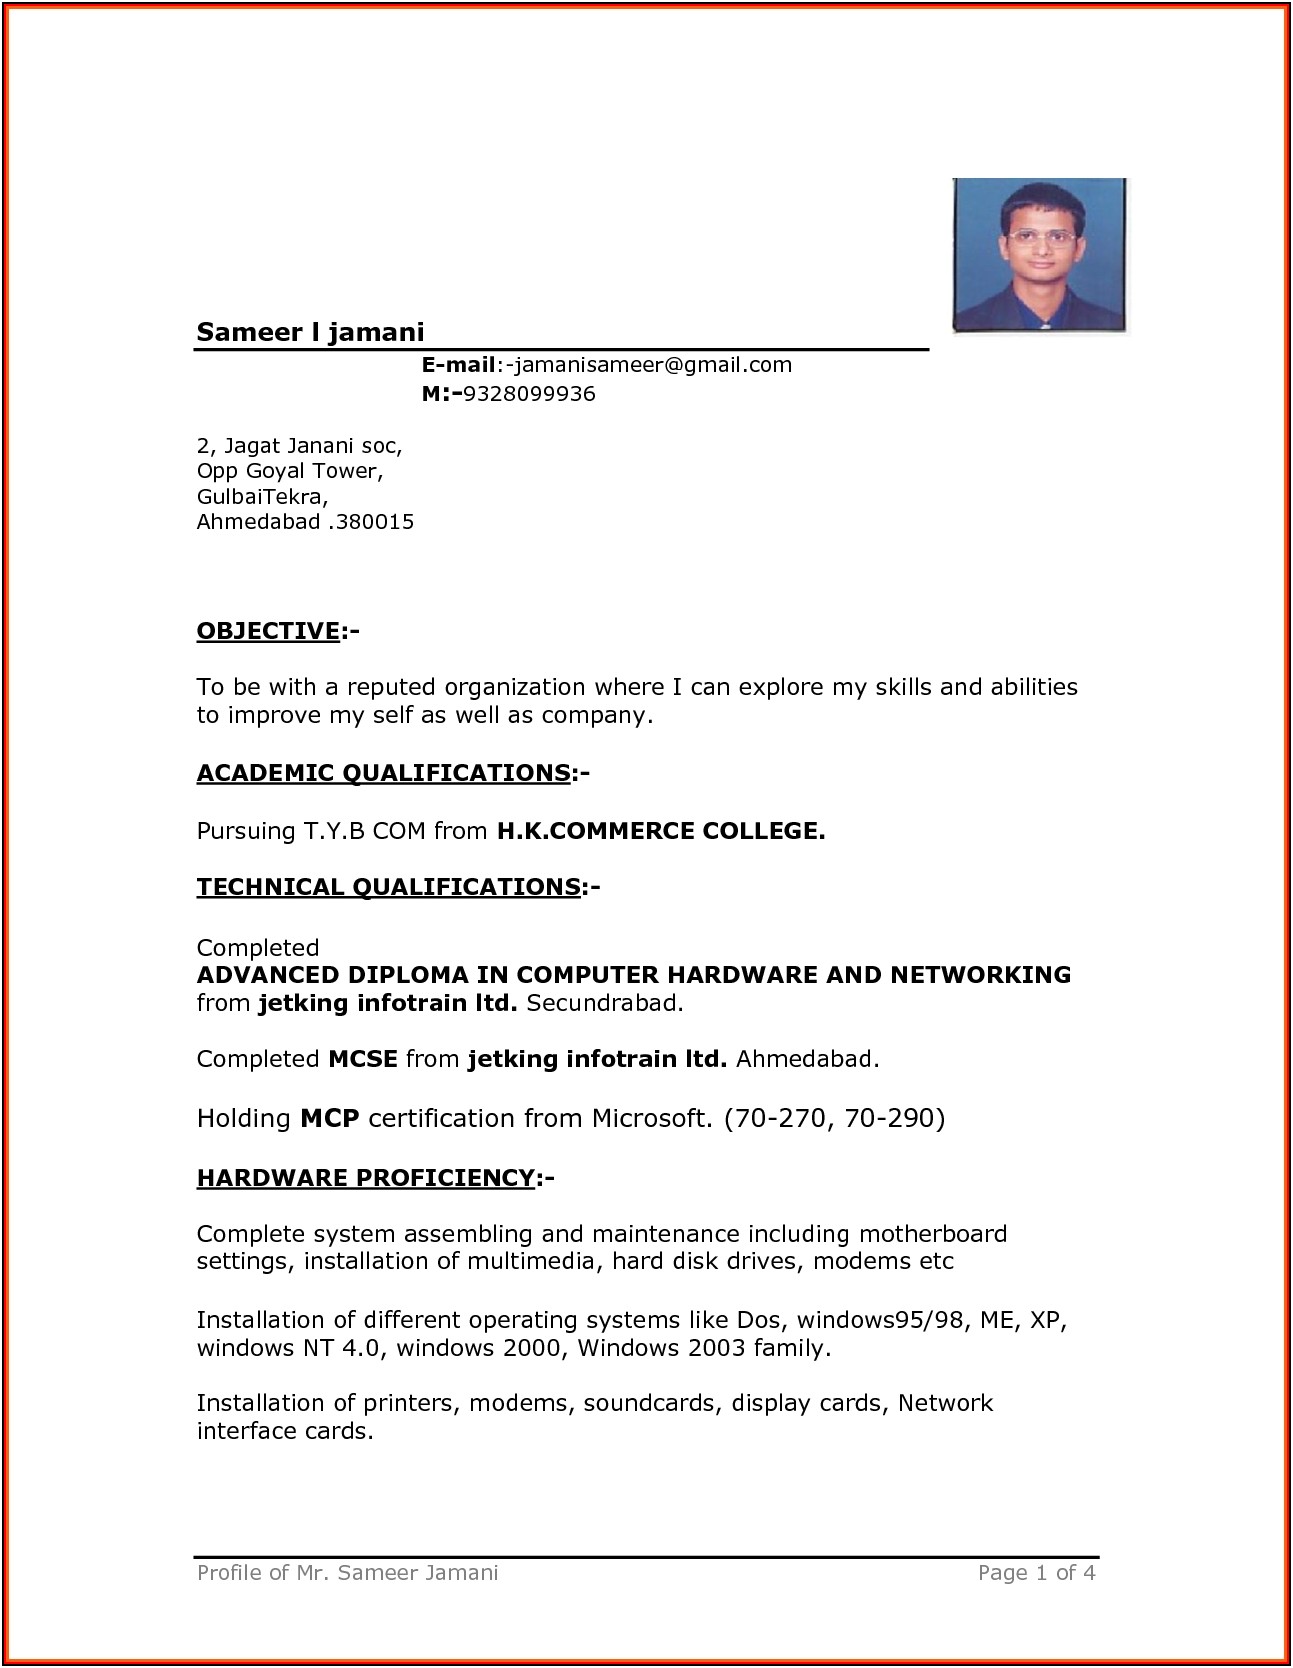 Free Downloadable Resume Templates Free Professional Resume Templates Microsoft Word 2007 free downloadable resume templates|wikiresume.com